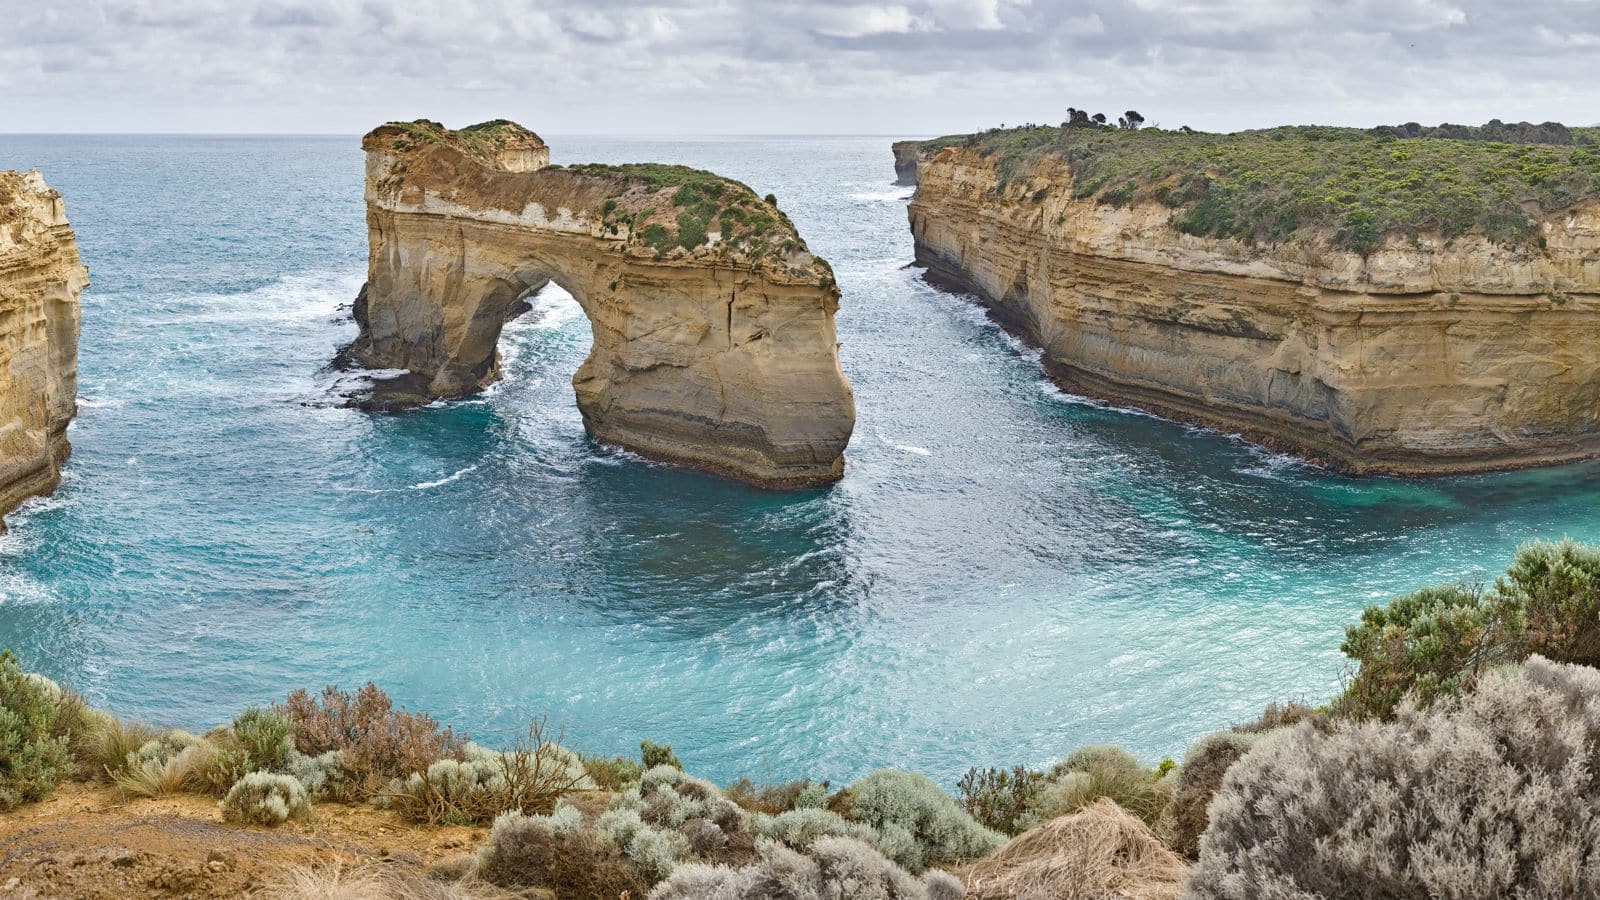 Have you been on Melbourne's scenic coastal weekend drives